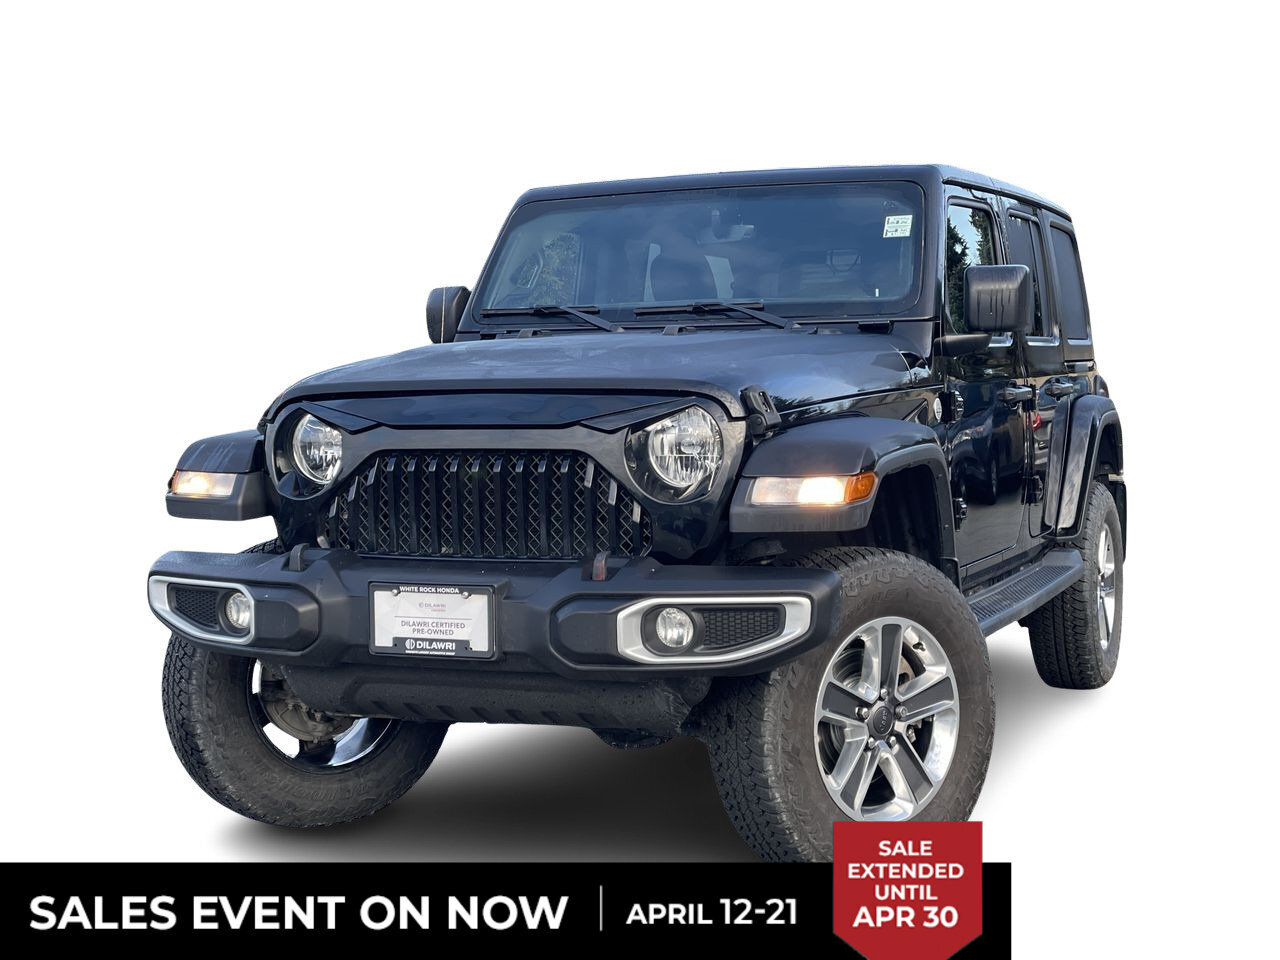 2020 Jeep Wrangler JL Unlimited Sahara | Local Trade | 4X4 | One Owne